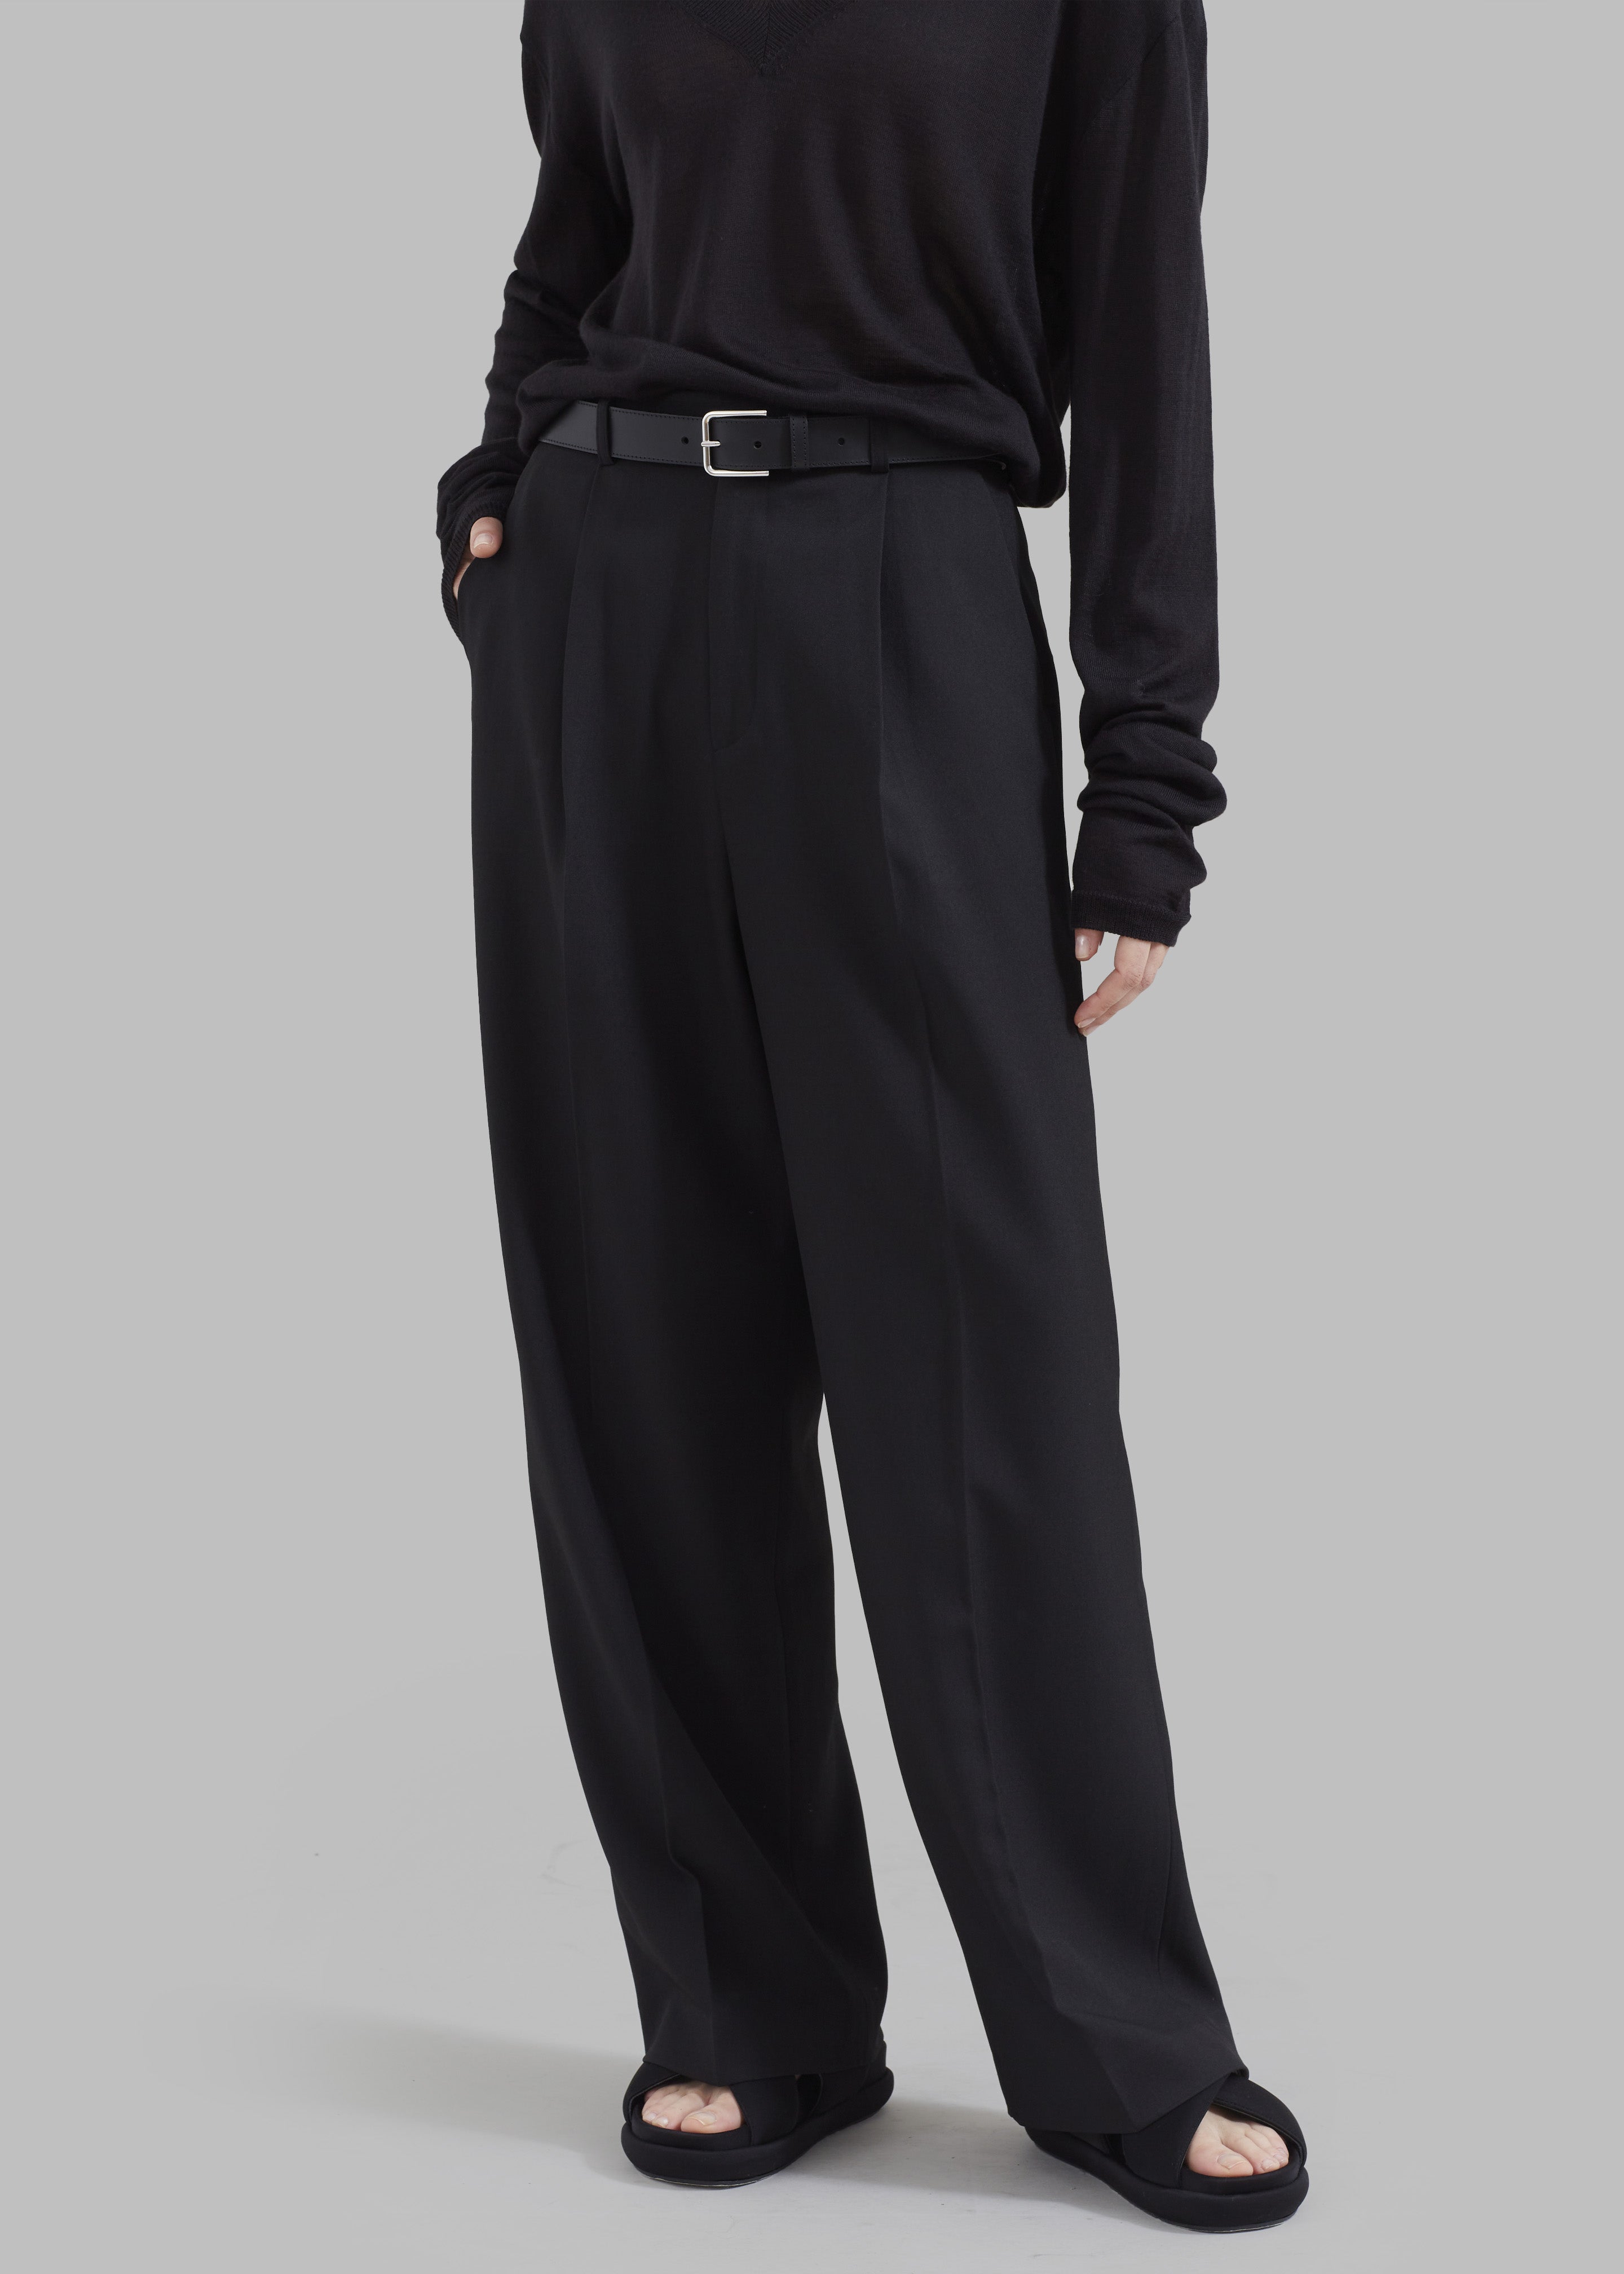 Nessi Pintuck Trousers - Black - 3